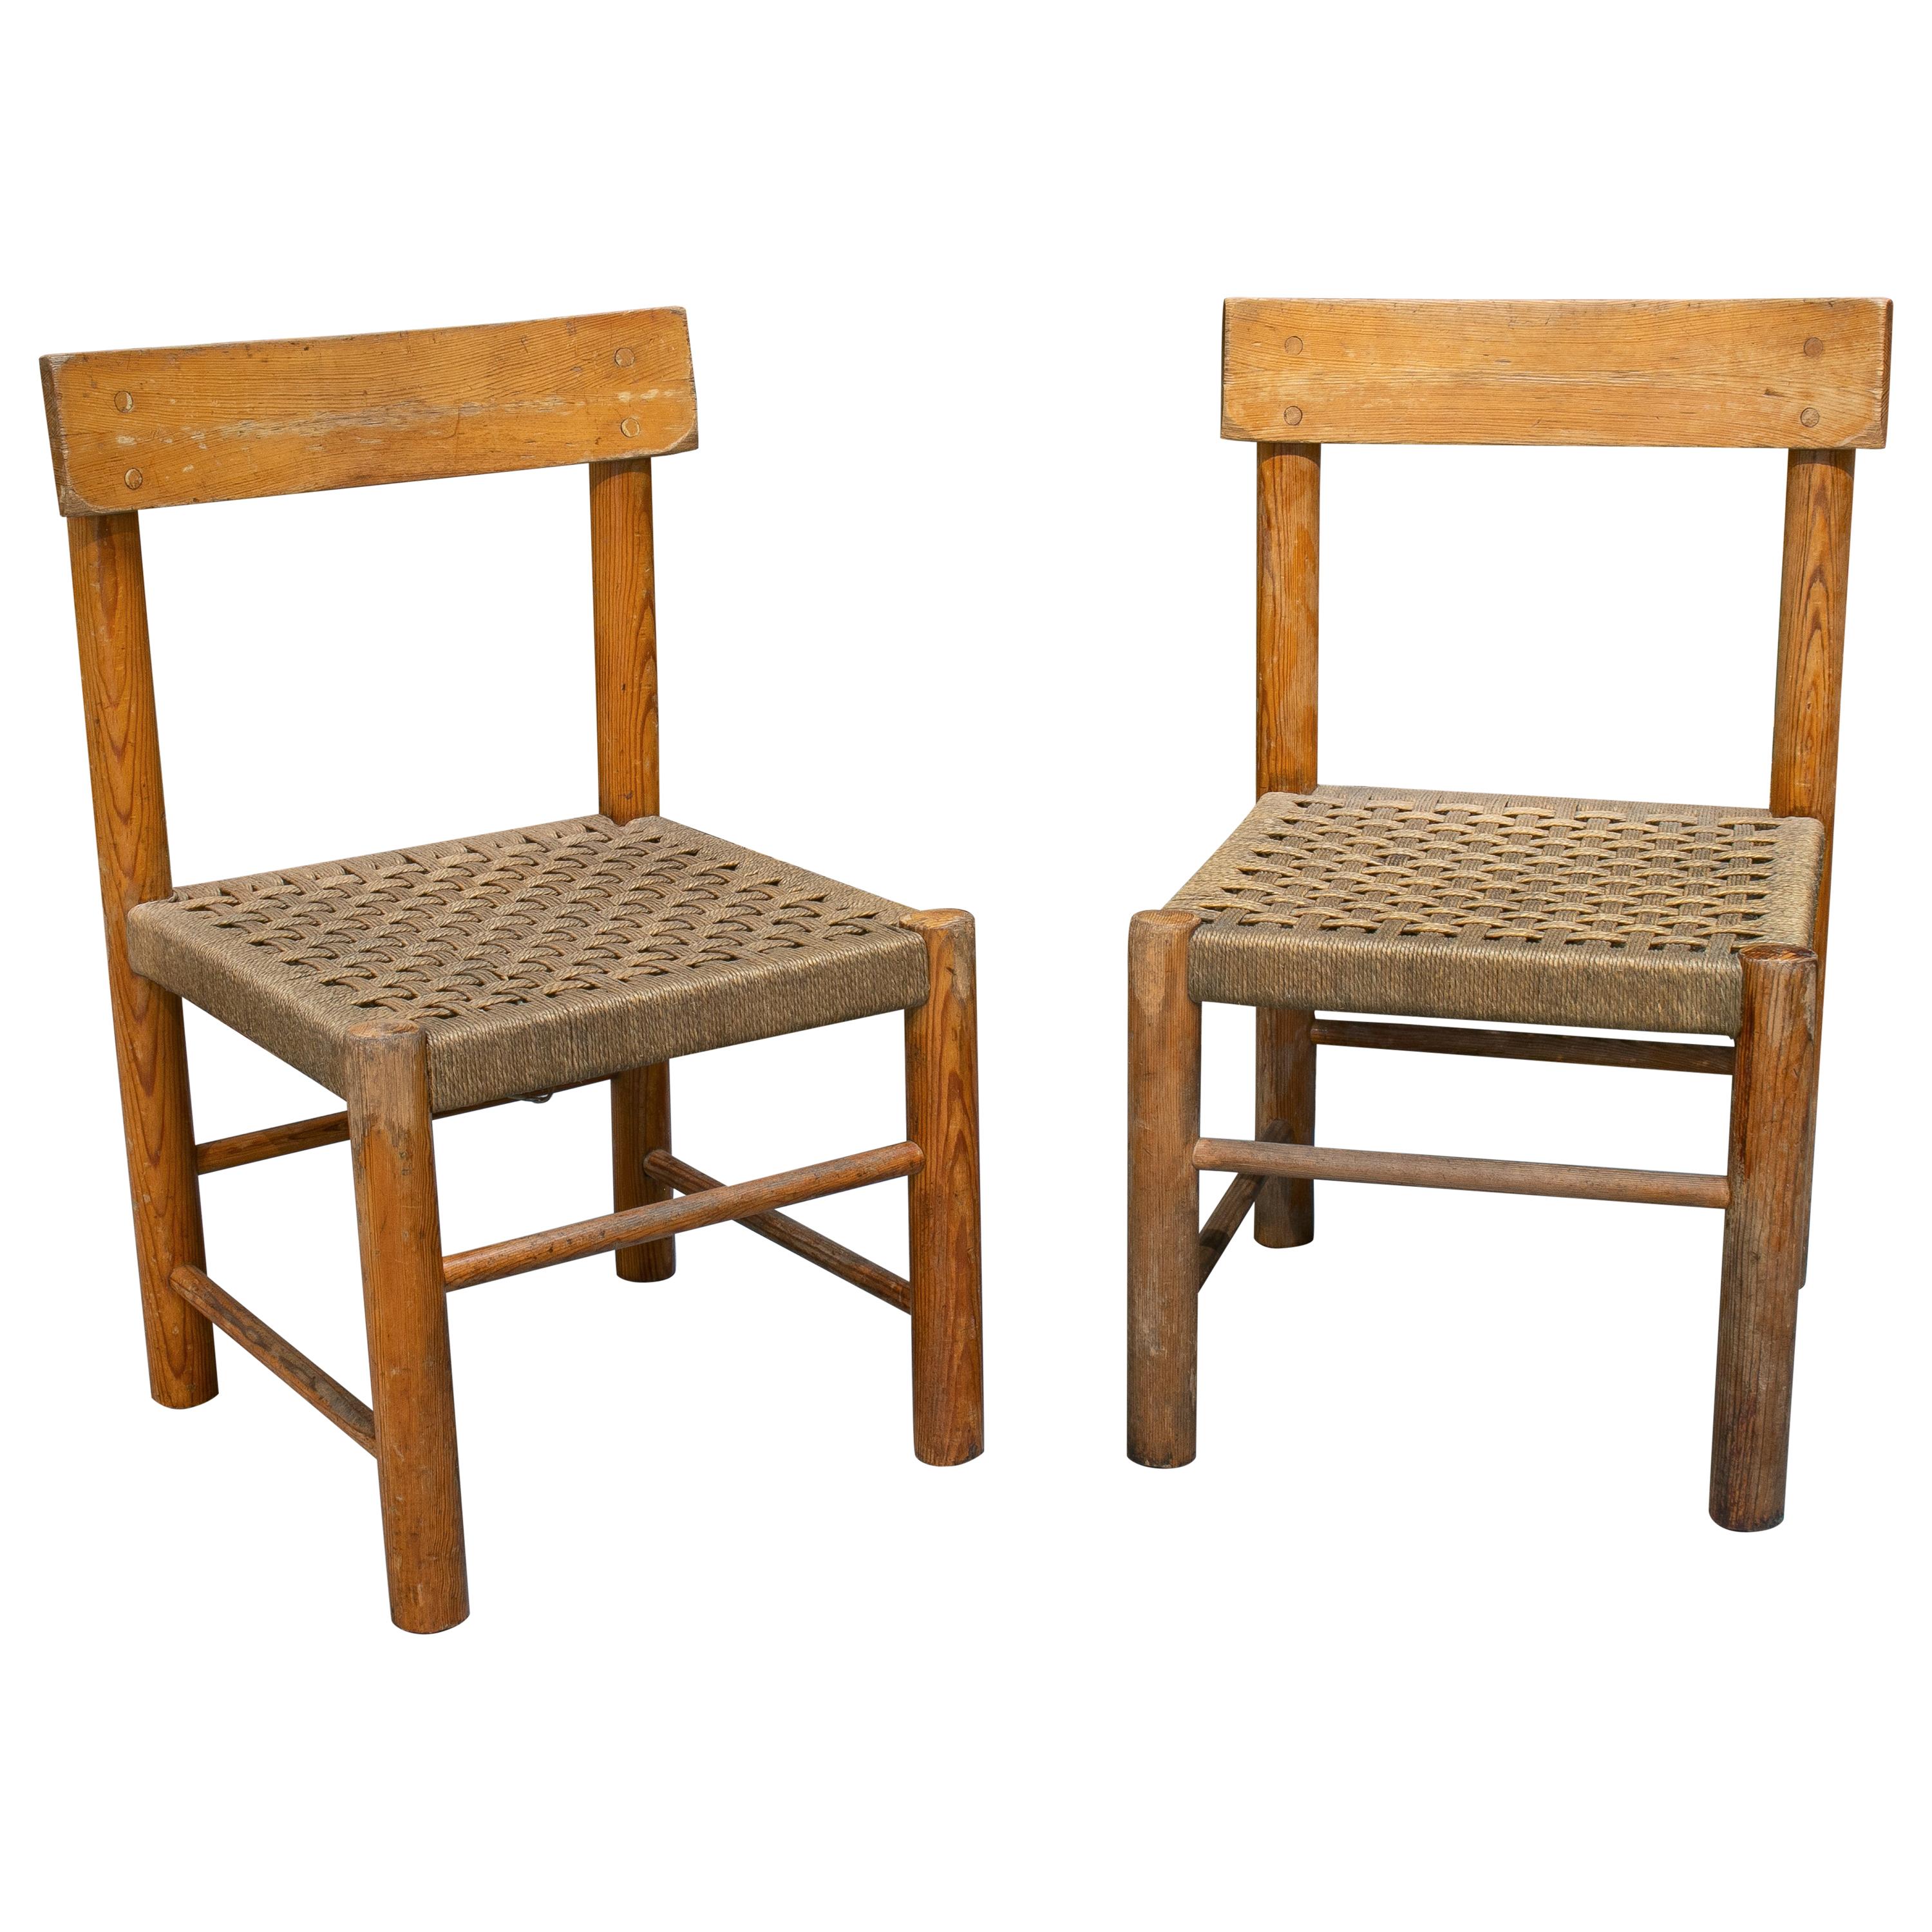 1970s Pair of Spanish Chairs with Woven Wicker Seats